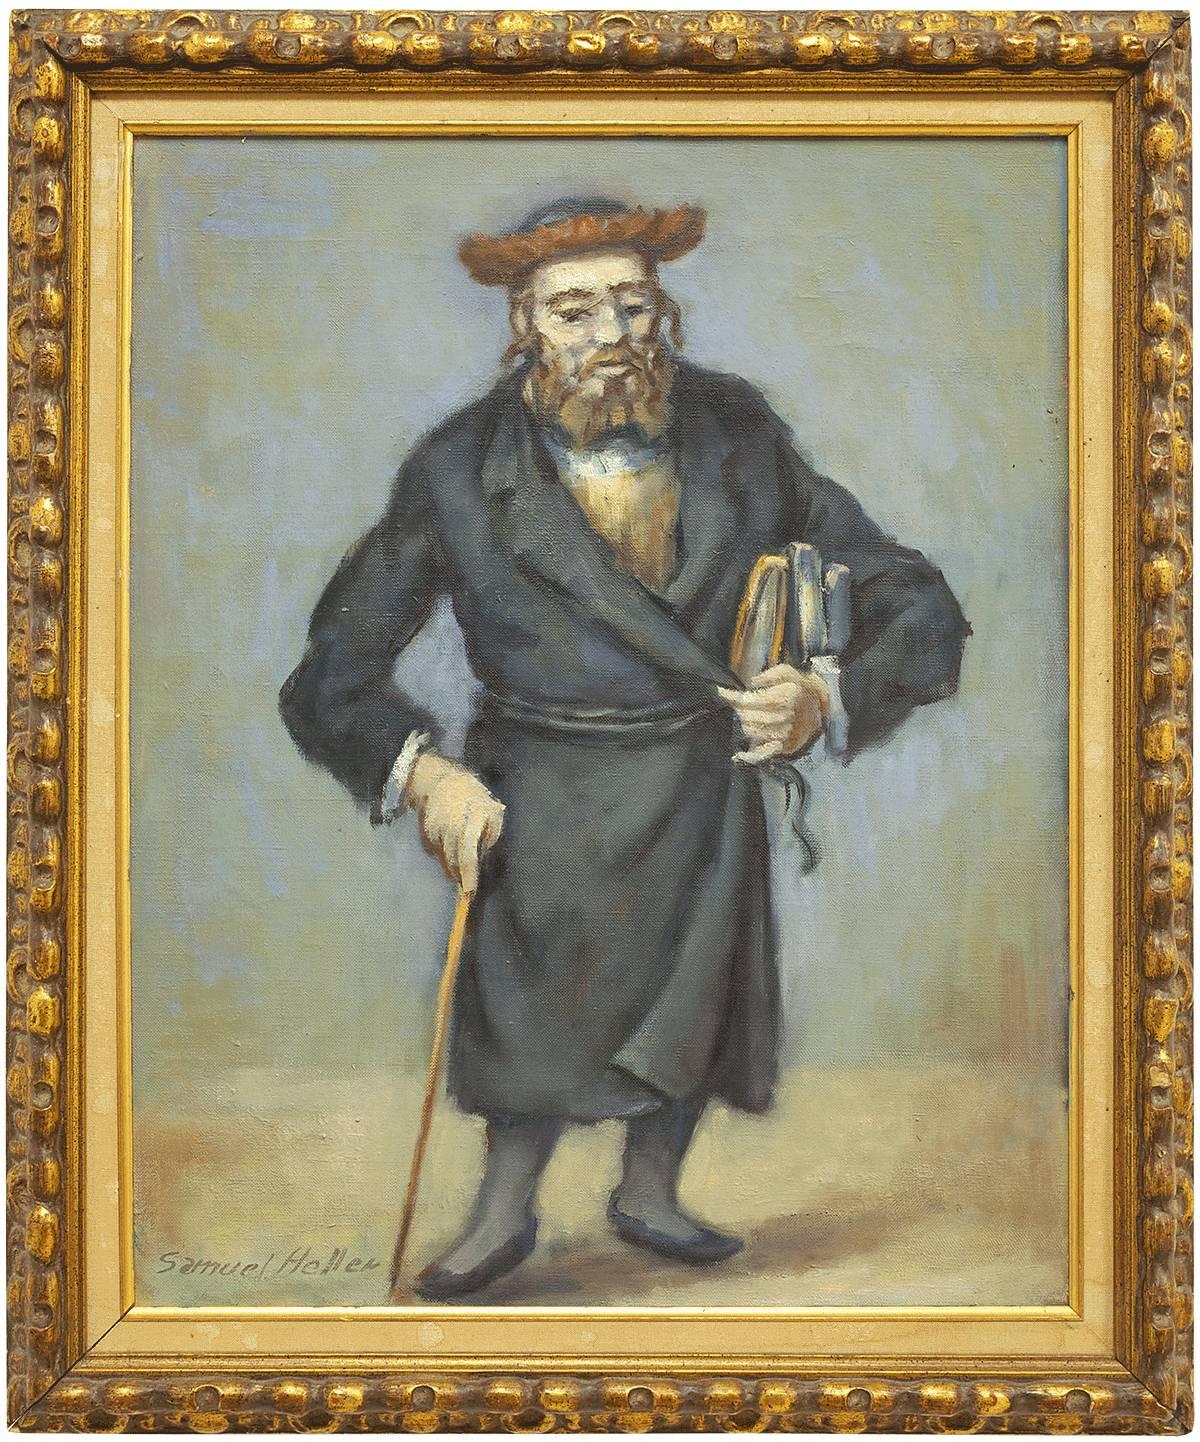 Samuel Heller Figurative Painting - Rare Judaica Rabbi Oil Painting (JEWISH MAN HOLDING A CANE AND BOOKS)